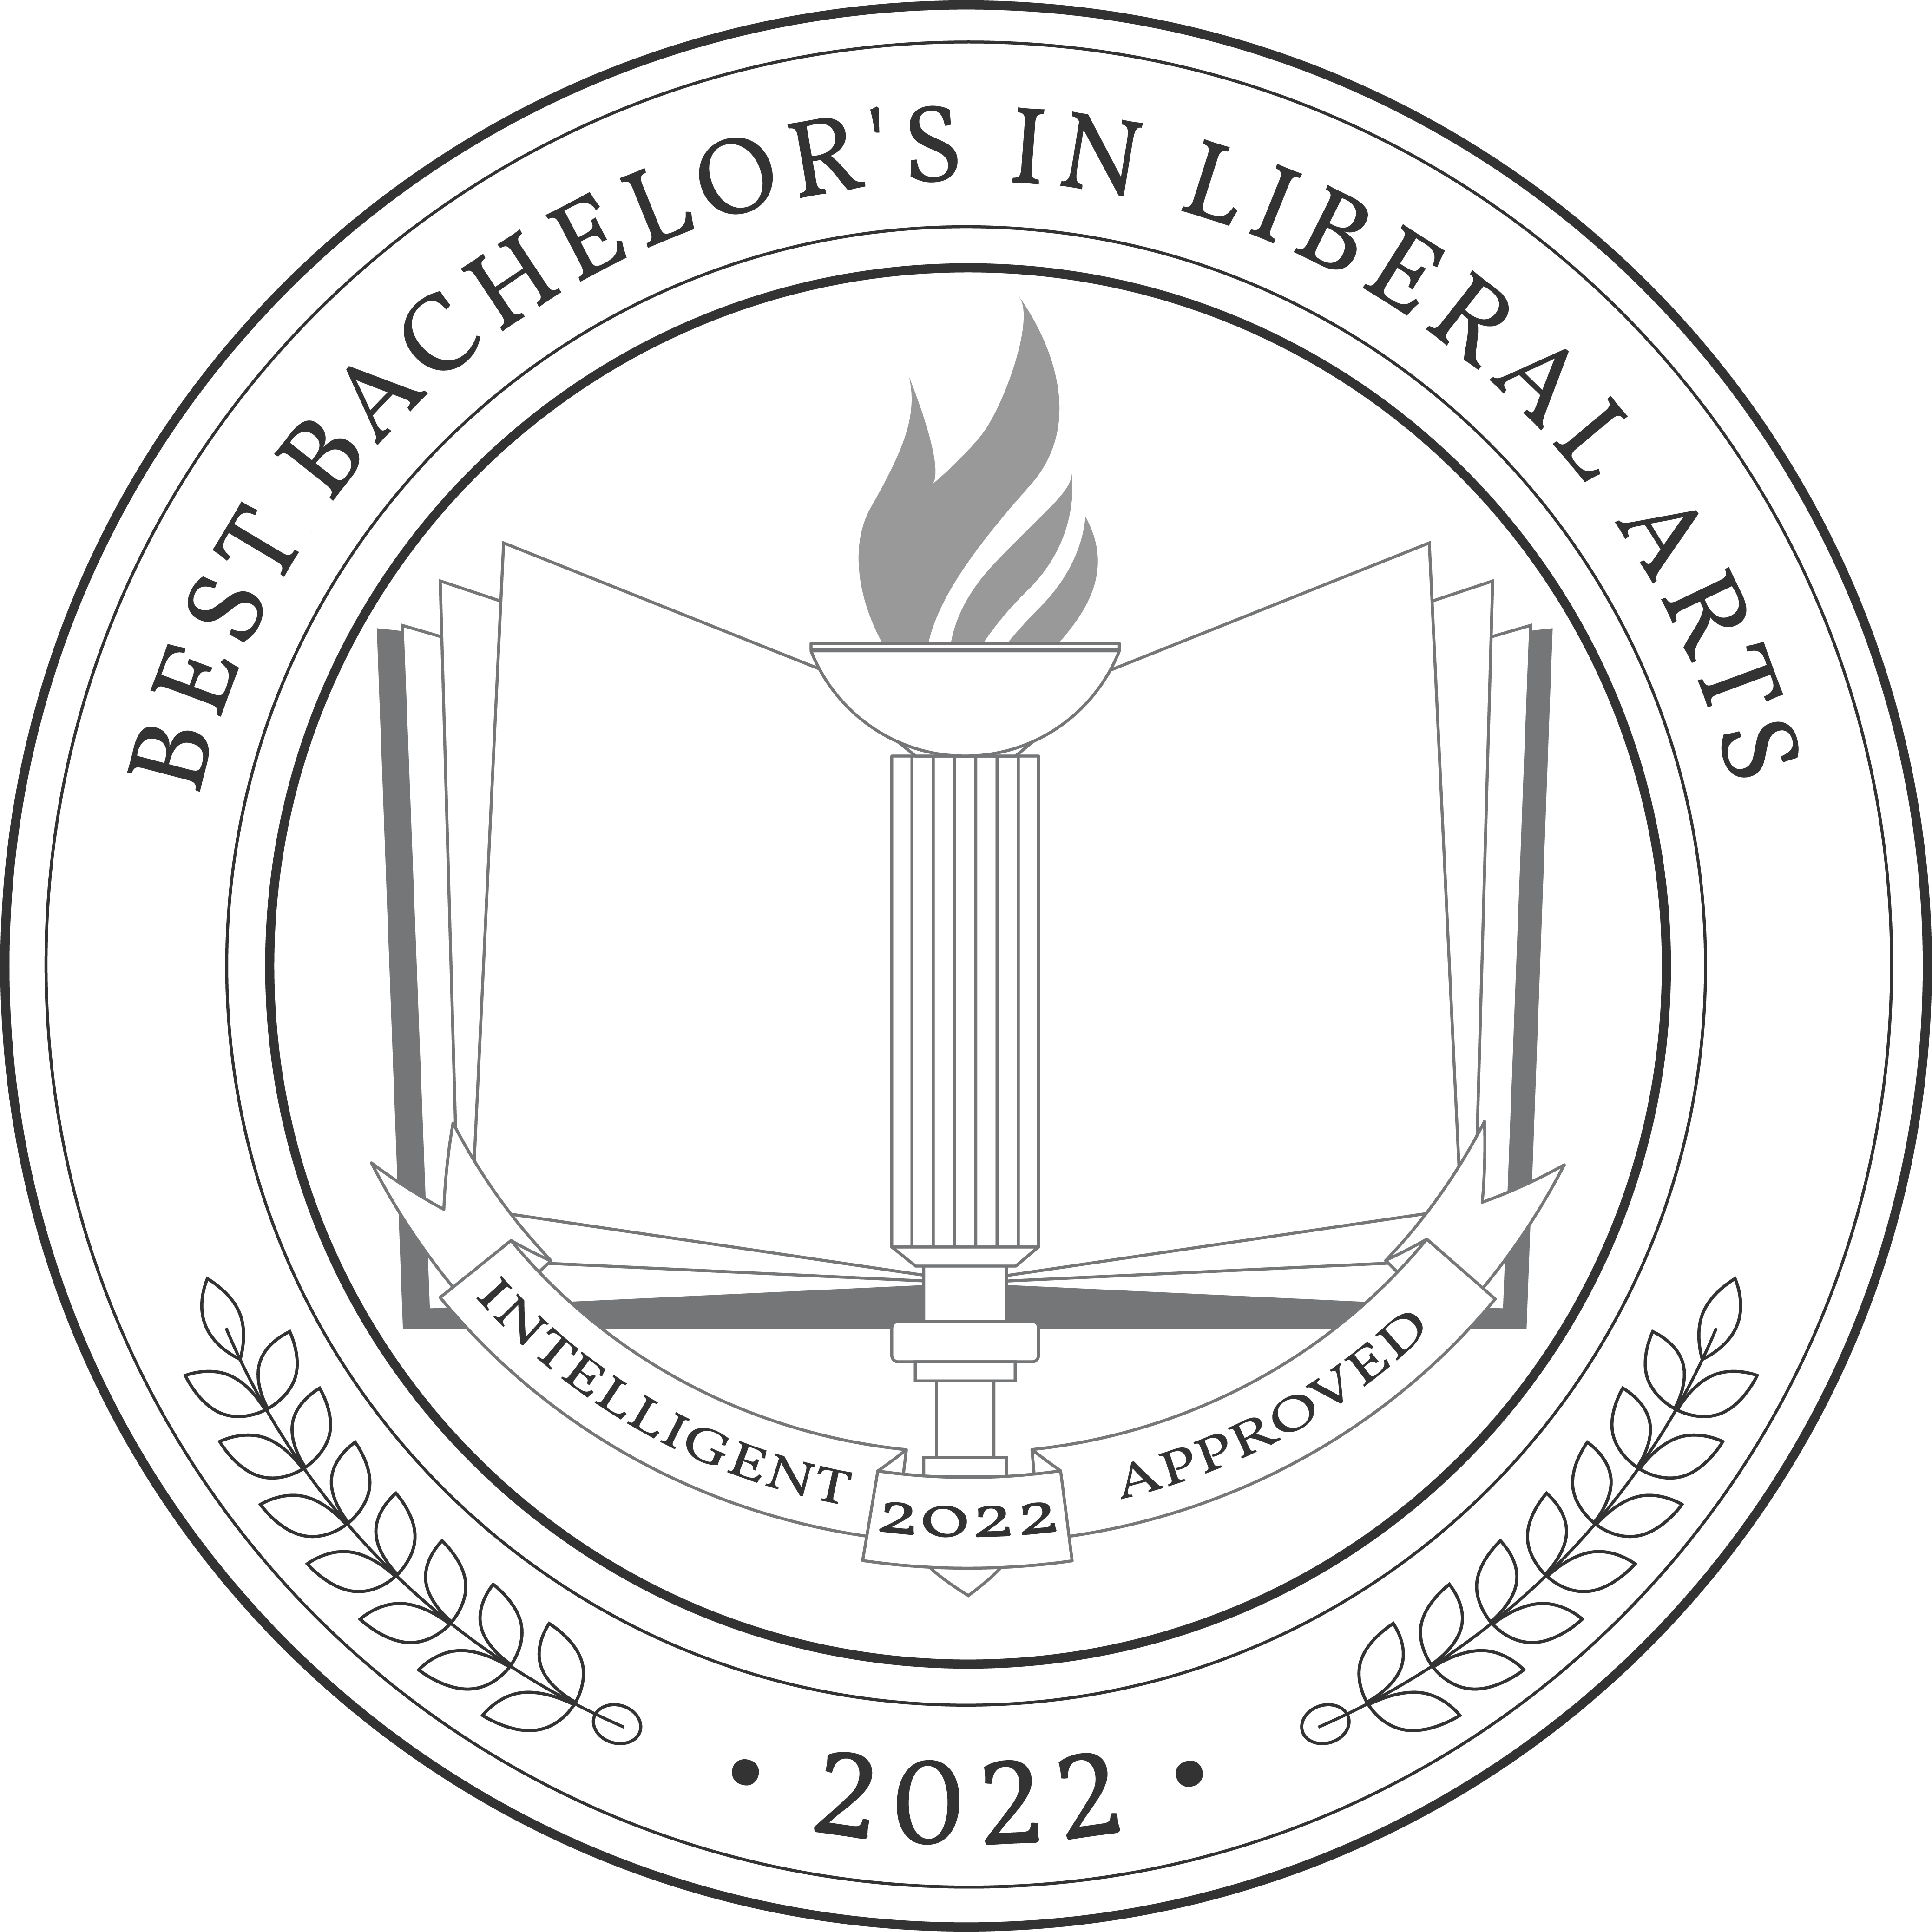 Best Bachelor's in Liberal Arts Badge